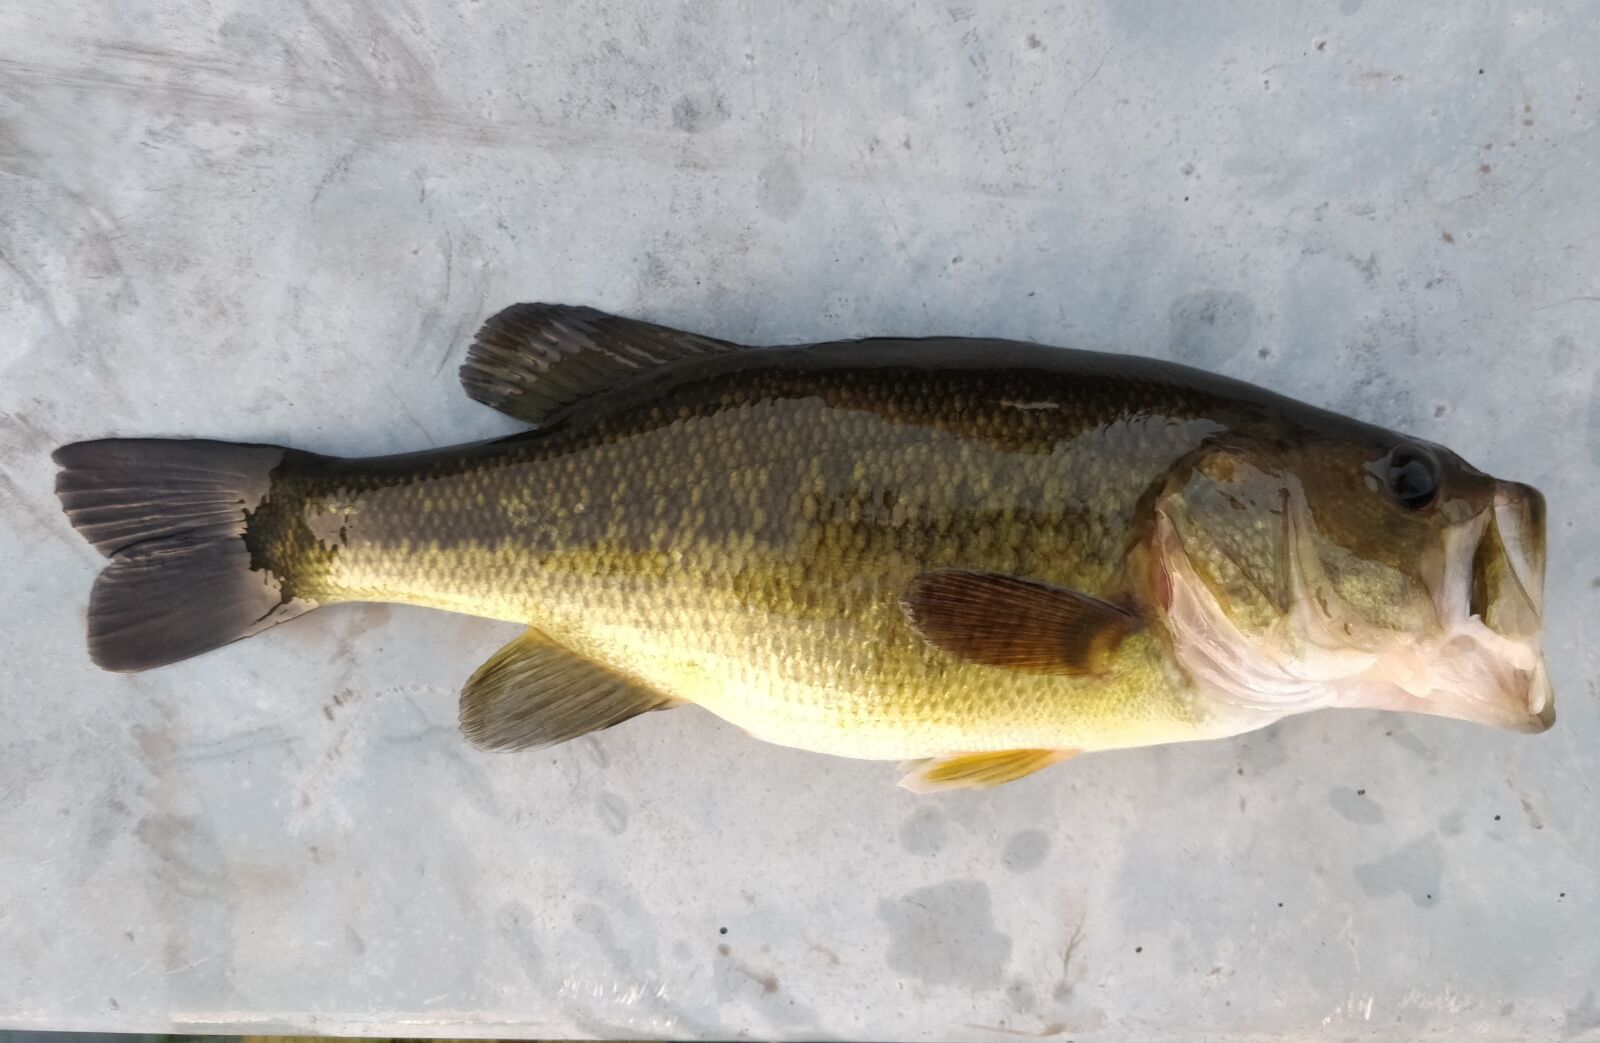 OnePlus A5000 sample photo. Bass, fish, nature photography